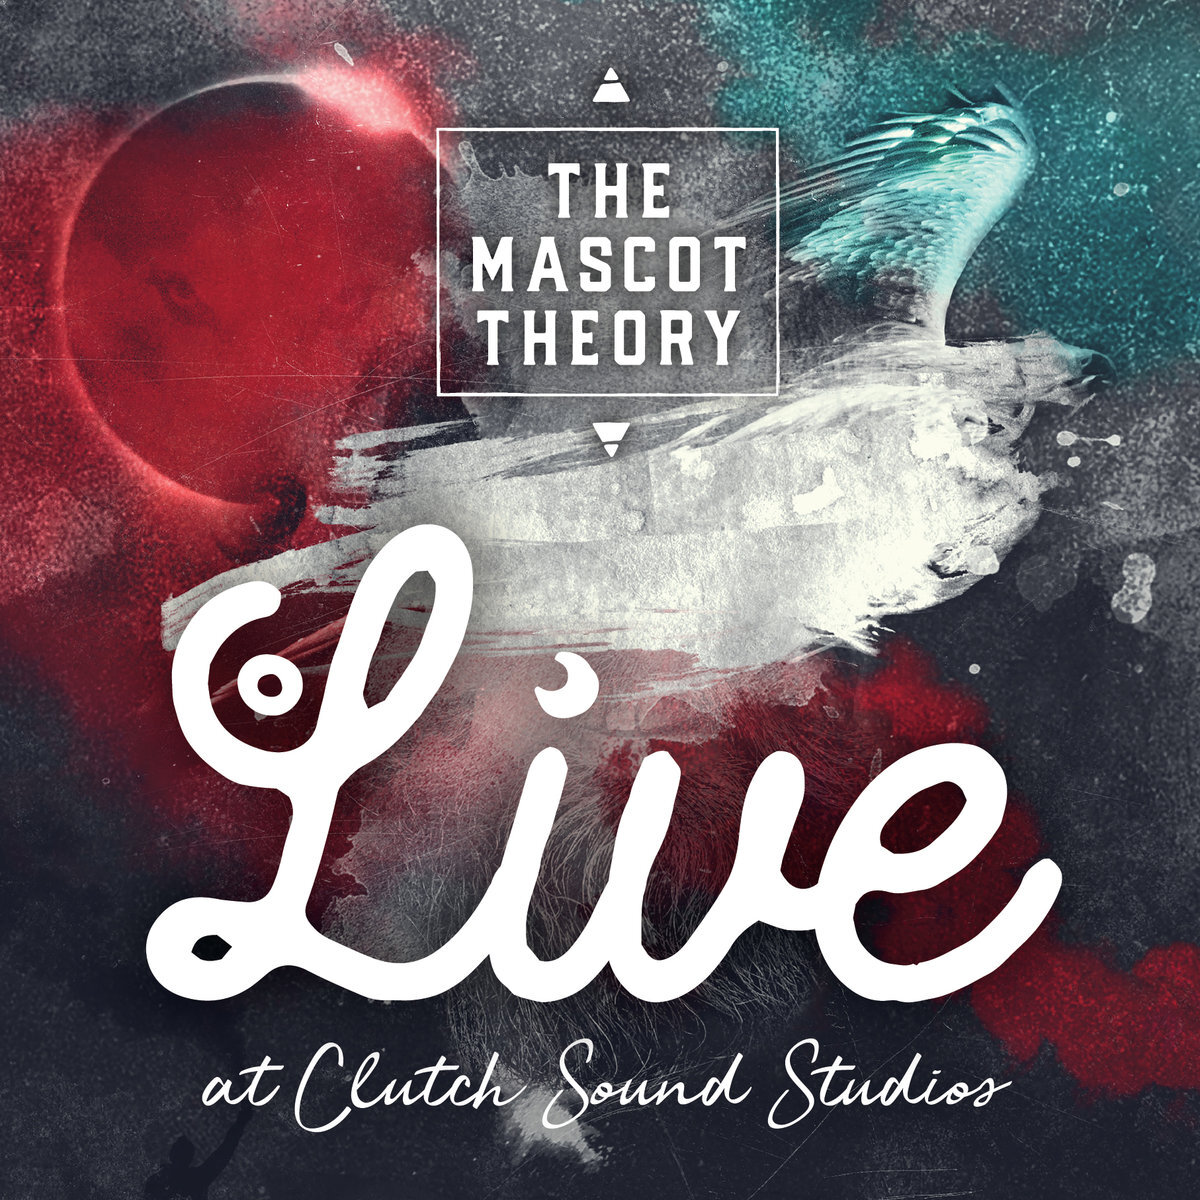 The Mascot Theory - Live at Clutch Sound Studios